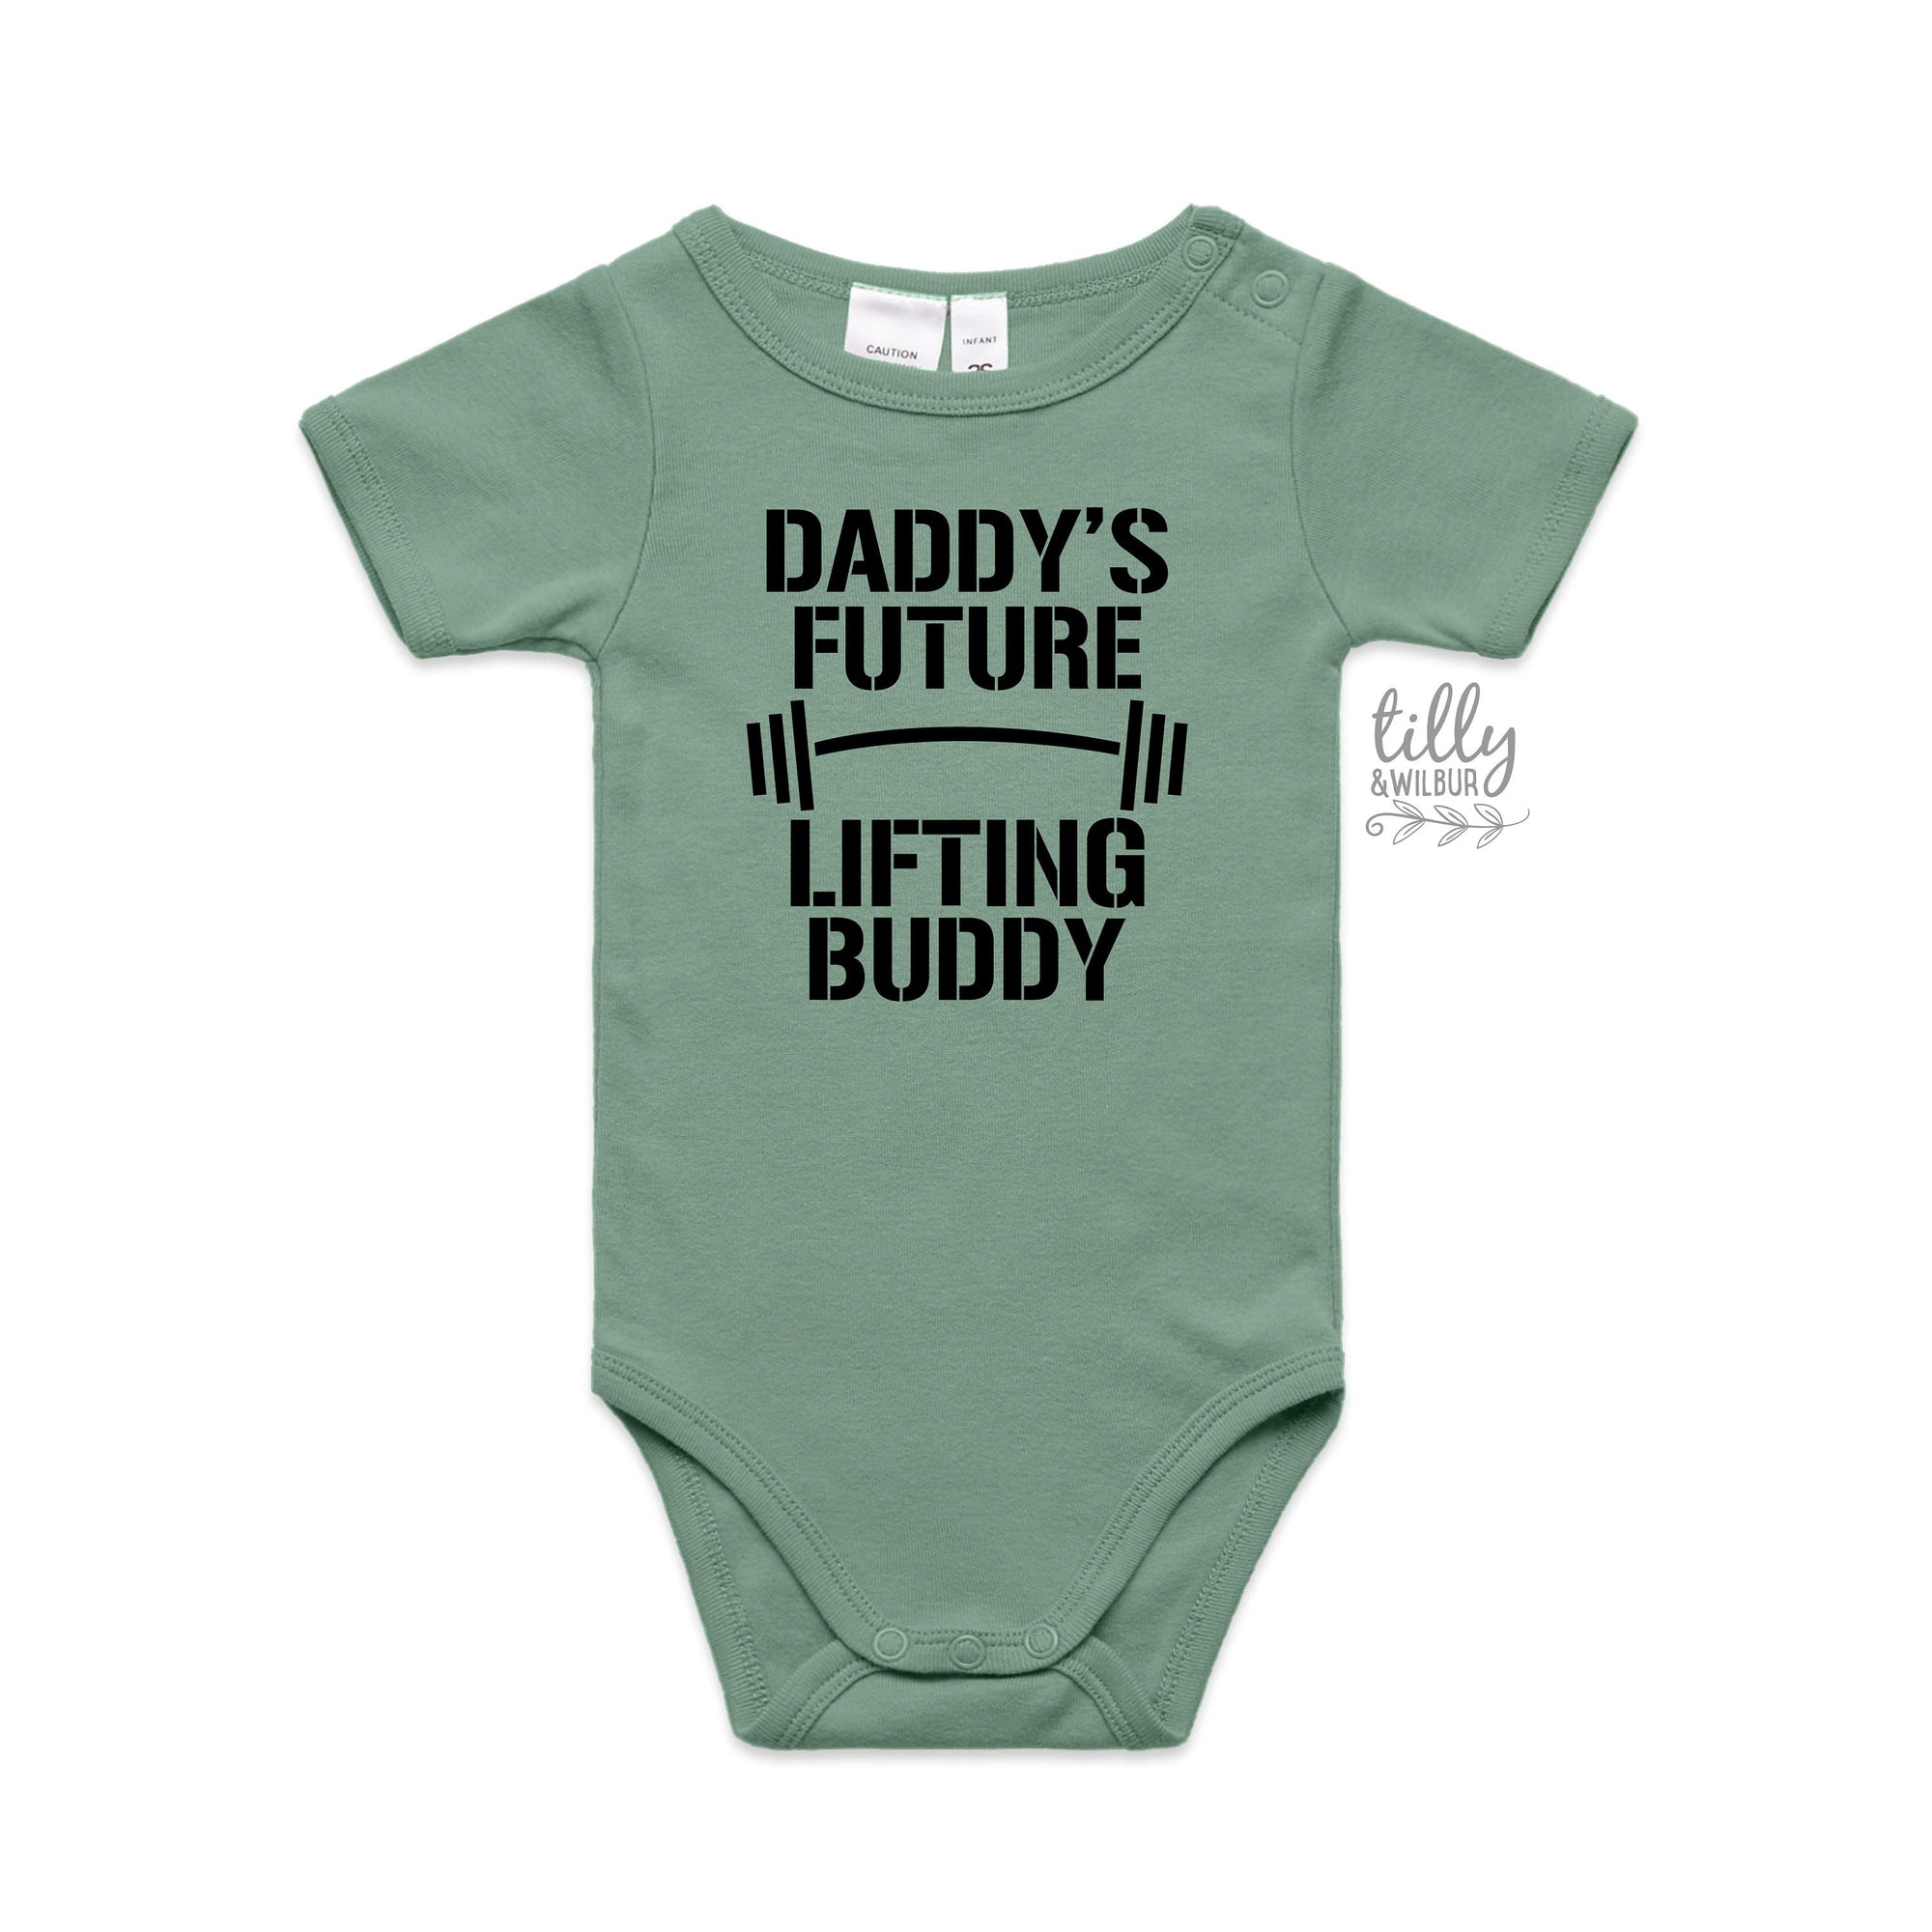 Daddy's Future Lifting Buddy, Daddy Bodysuit, Daddy Baby Clothes, New Dad Gift, Dad Gym, Dad Workout, Pregnancy Announcement, Baby Reveal